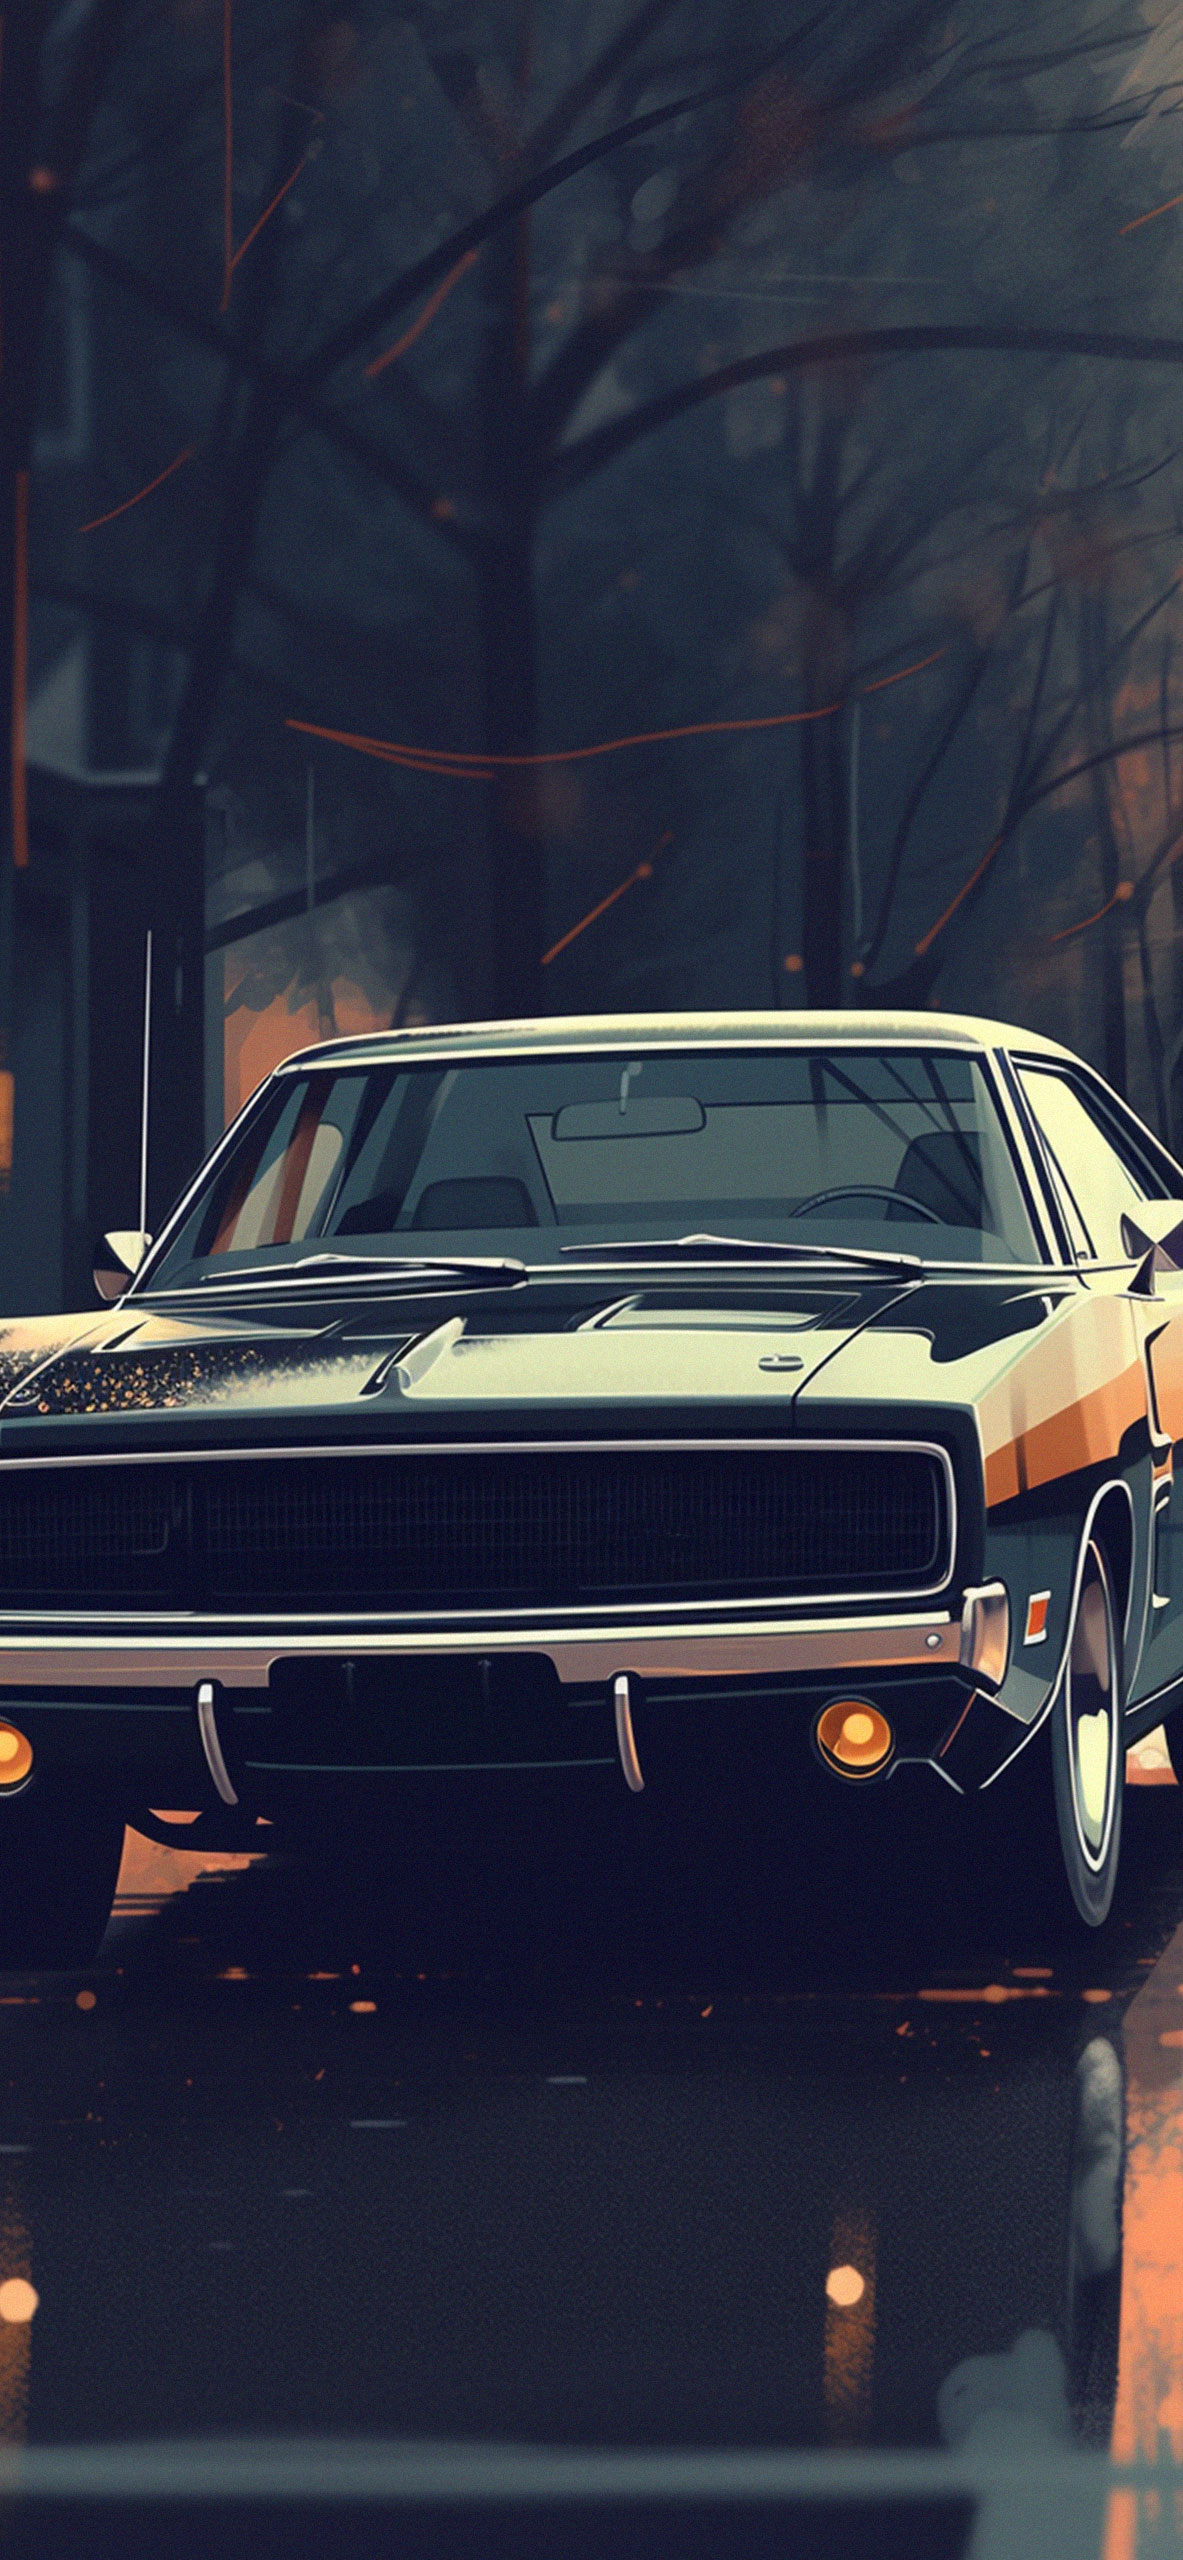 Wallpaper ID 109466  Dodge Charger car water birds black cars popup  headlights free download